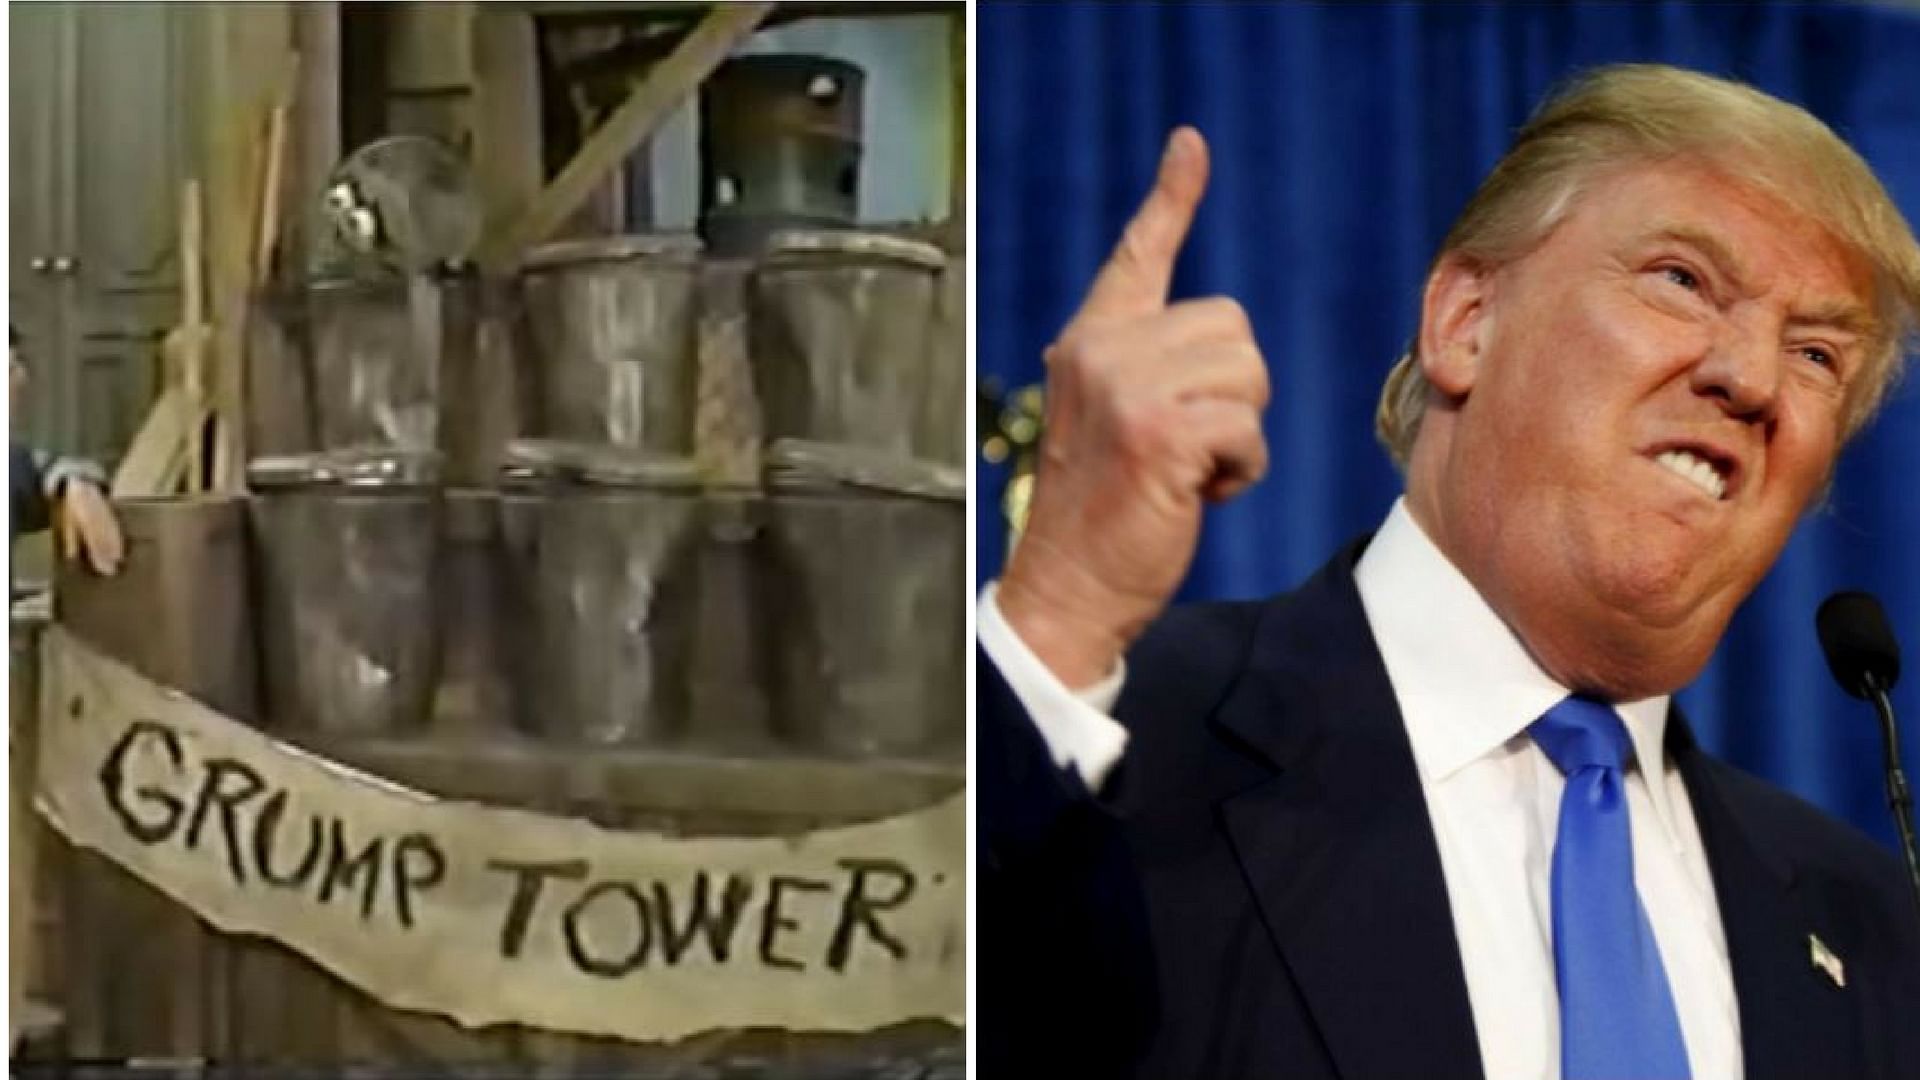 The fictional ‘Grump Tower’ as shown on Sesame Street (left) and the US President Donald Trump (right) (Image Courtesy Youtube/AP/<b>Altered by The Quint</b>)